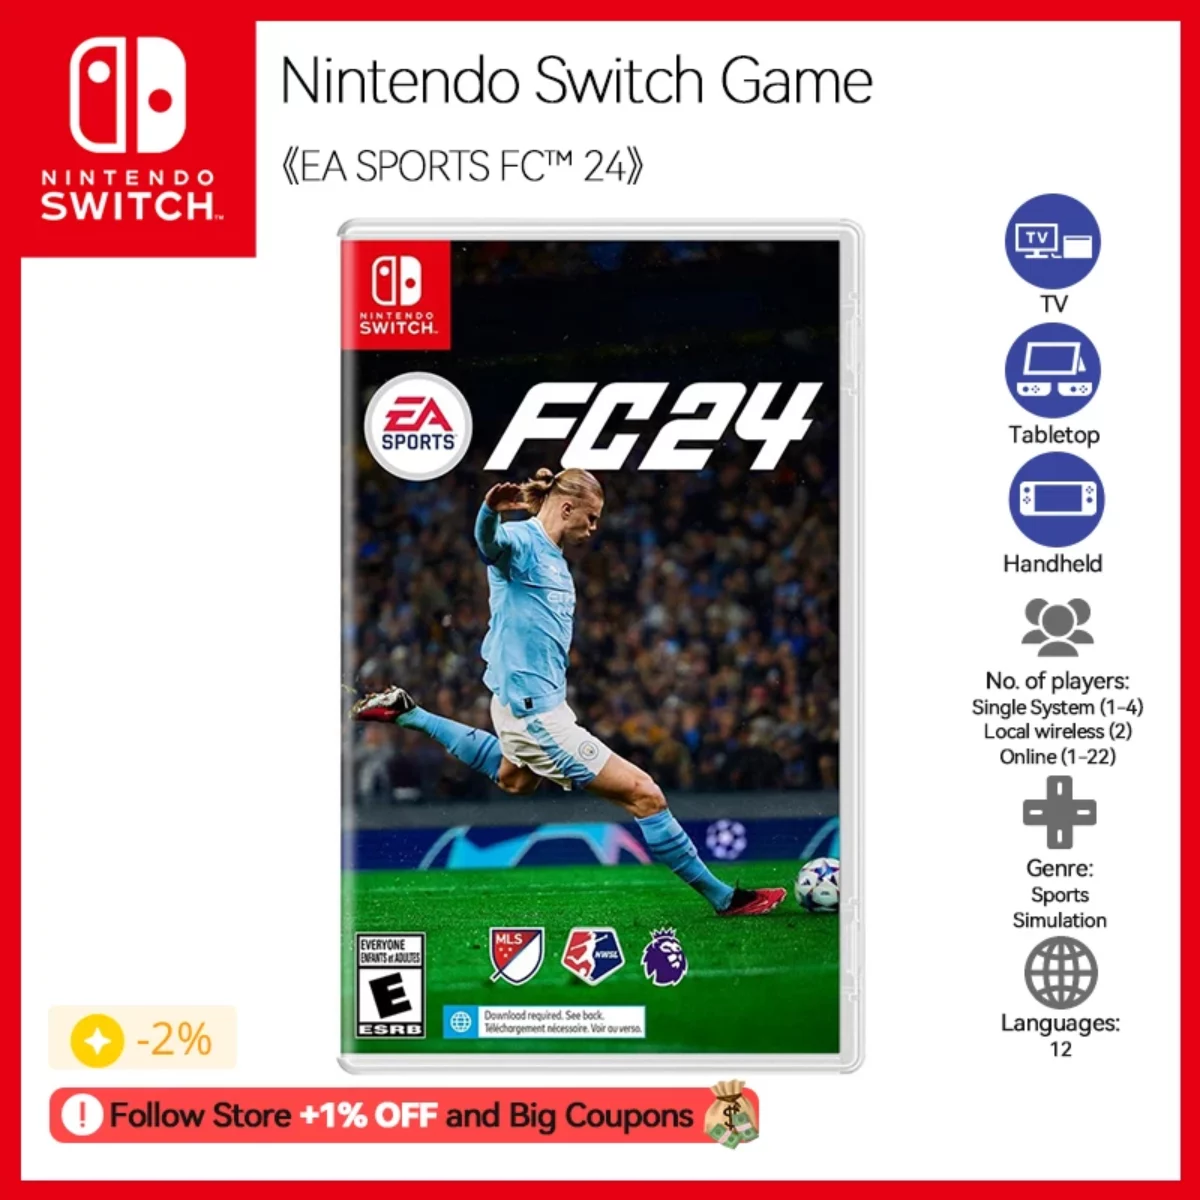 Nintendo Switch EA SPORTS FC 24 Game Deals for Nintendo Switch 